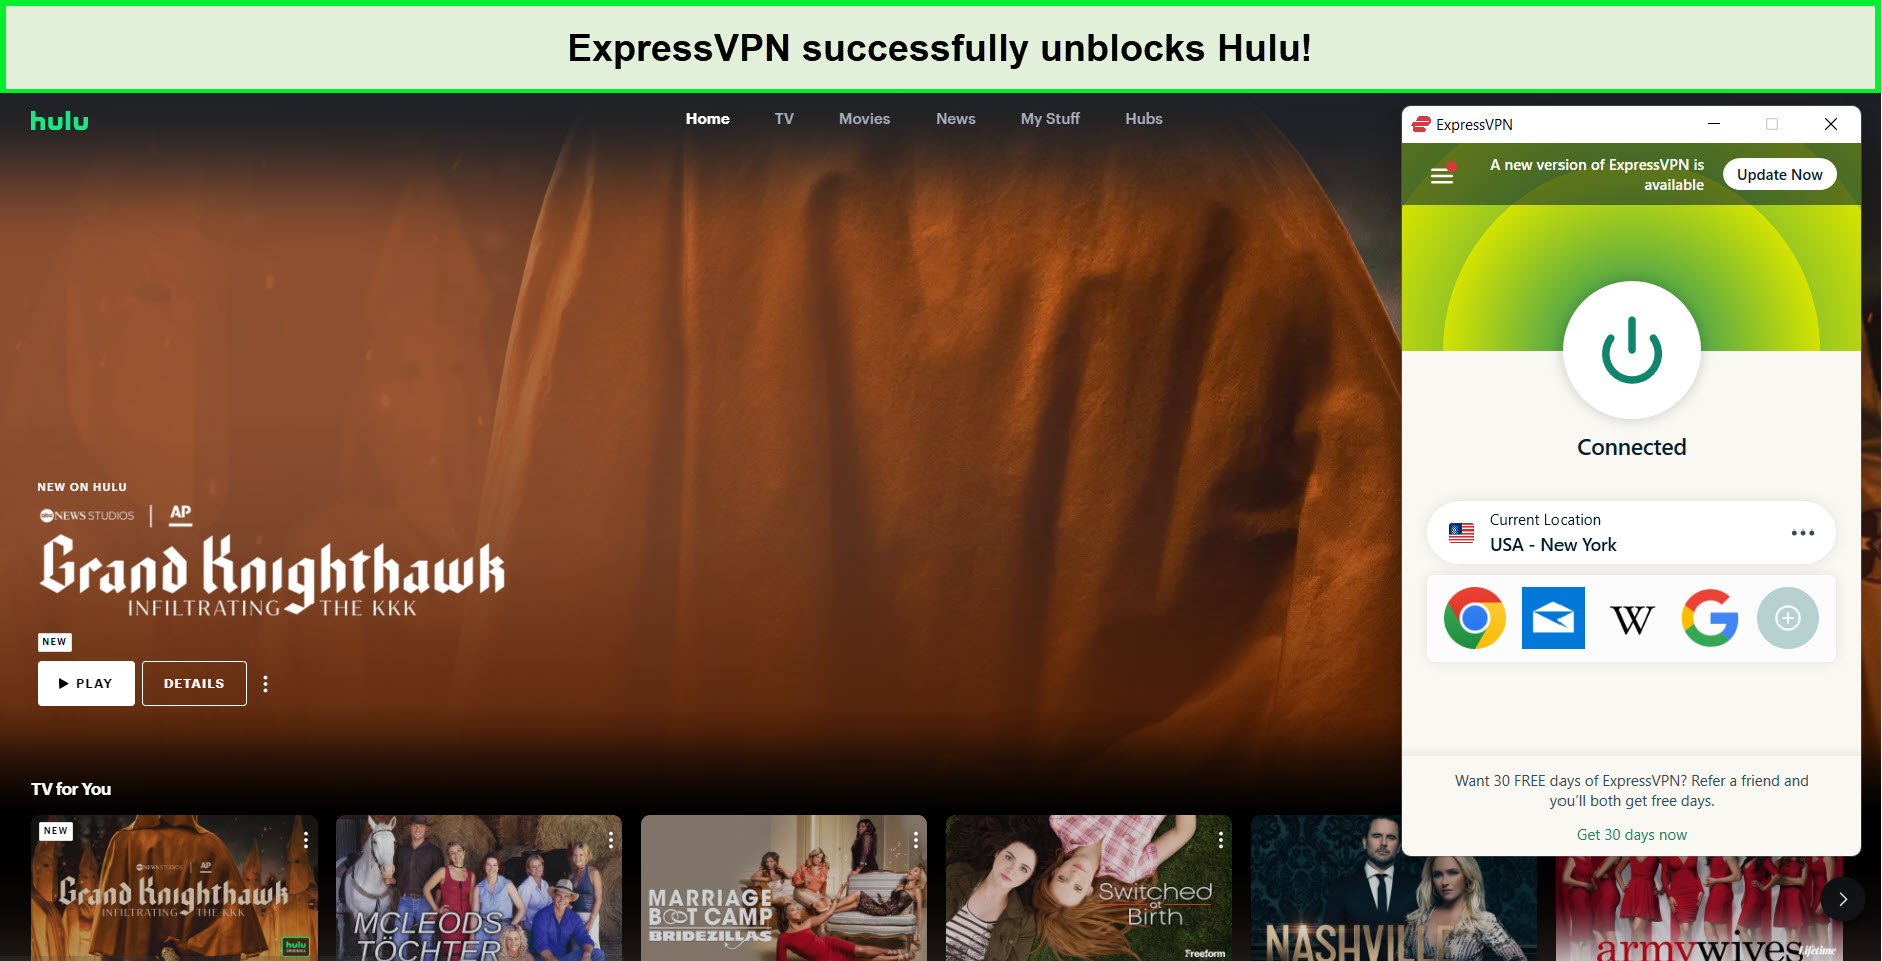 expressvpn-allows-to-pay-for-hulu-subscription-in-Spain